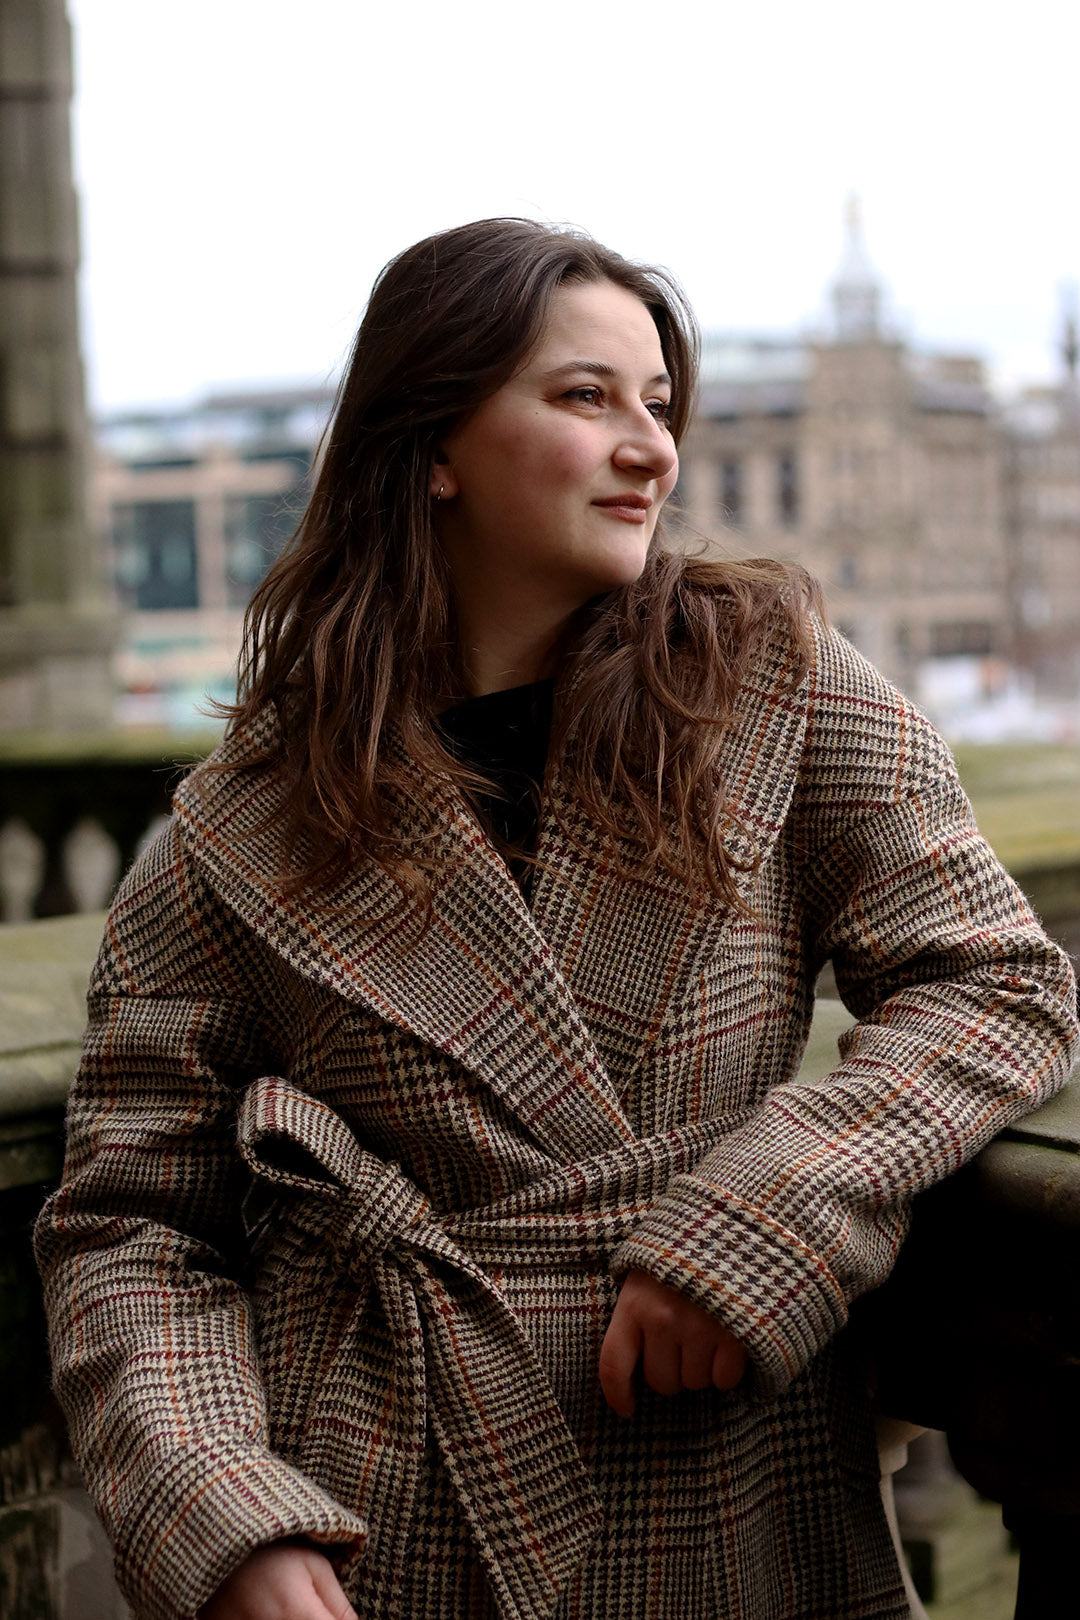 Harris Tweed checked Cora coat in camel with burgundy and ochre check, shown on model with blurred cityscape in background.